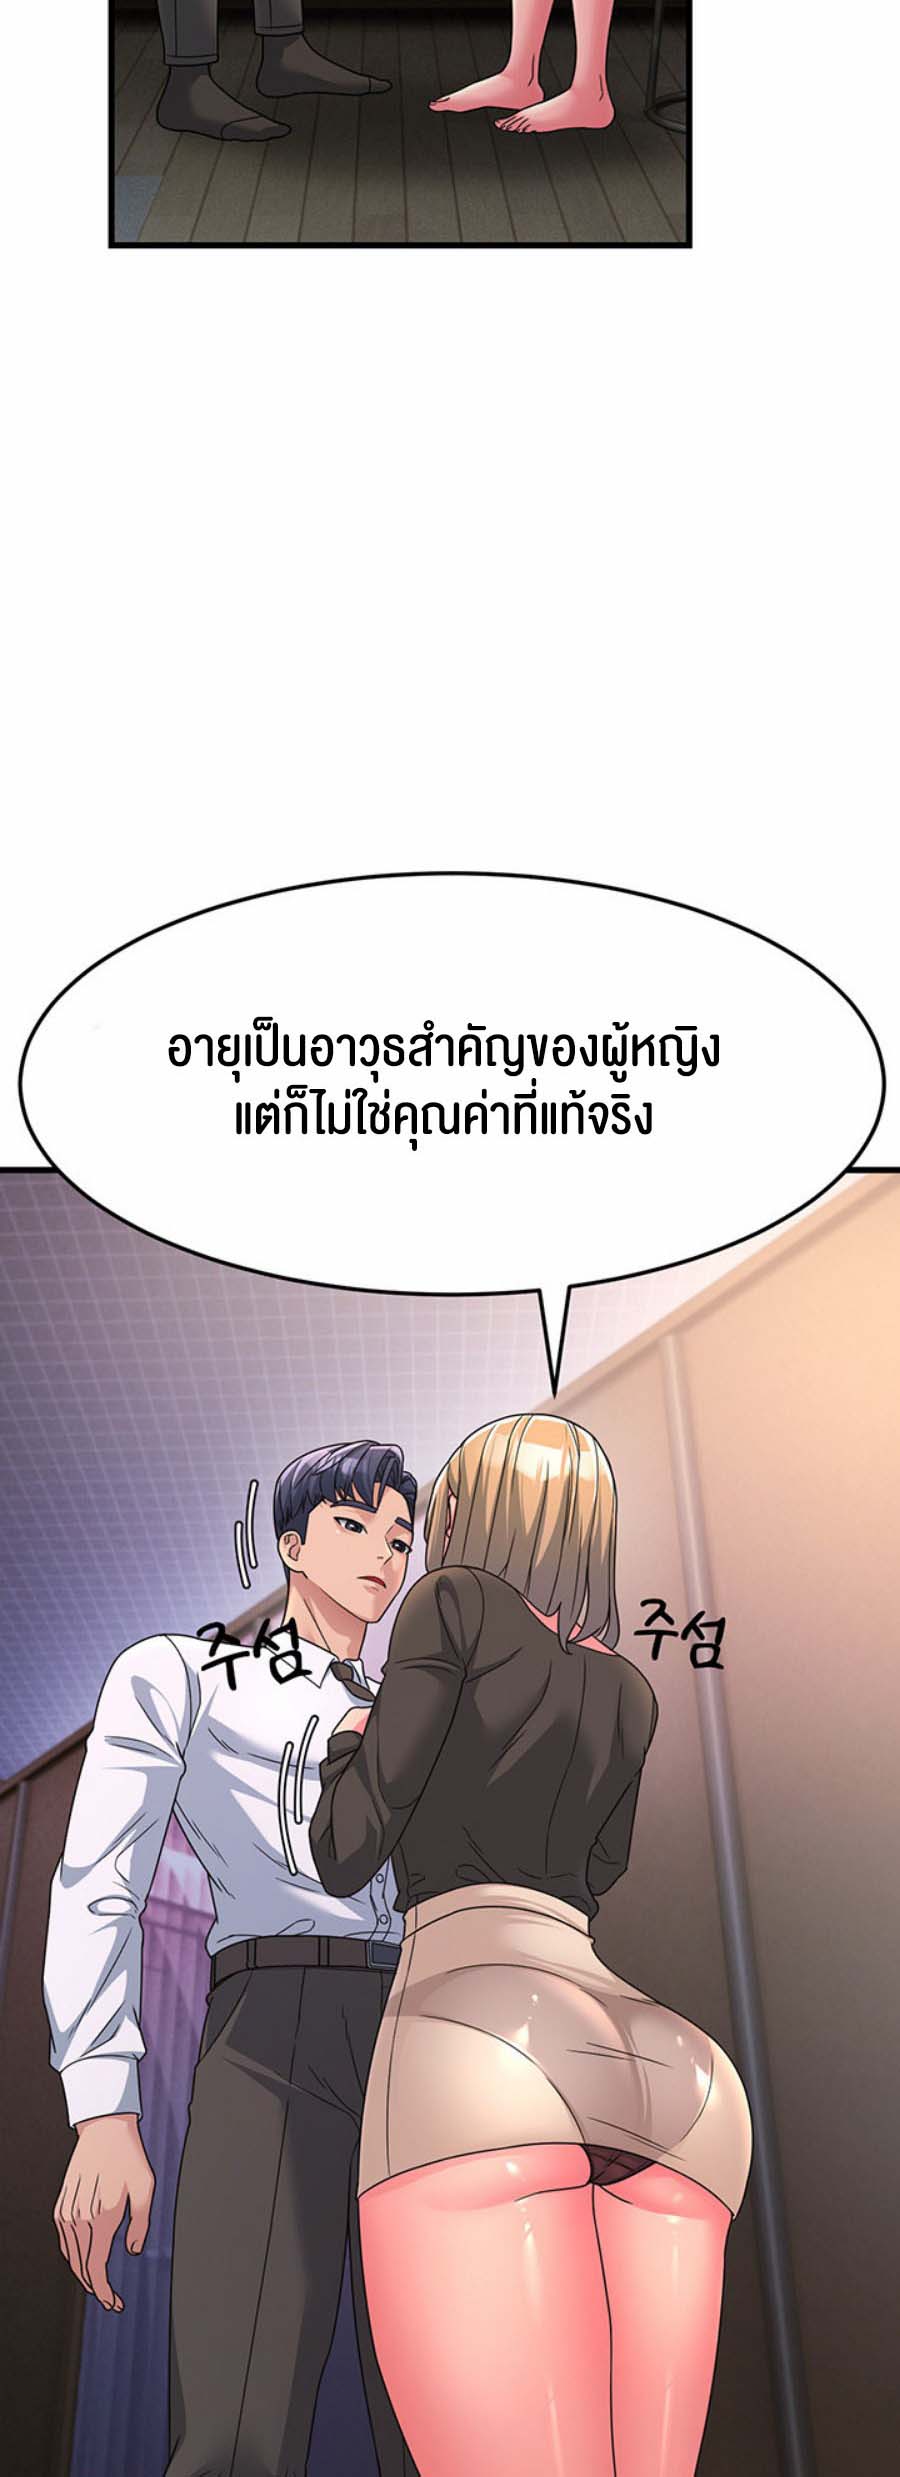 à¸­à¹ˆà¸²à¸™à¹‚à¸”à¸ˆà¸´à¸™ à¹€à¸£à¸·à¹ˆà¸­à¸‡ Mother in Law Bends To My Will 8 26